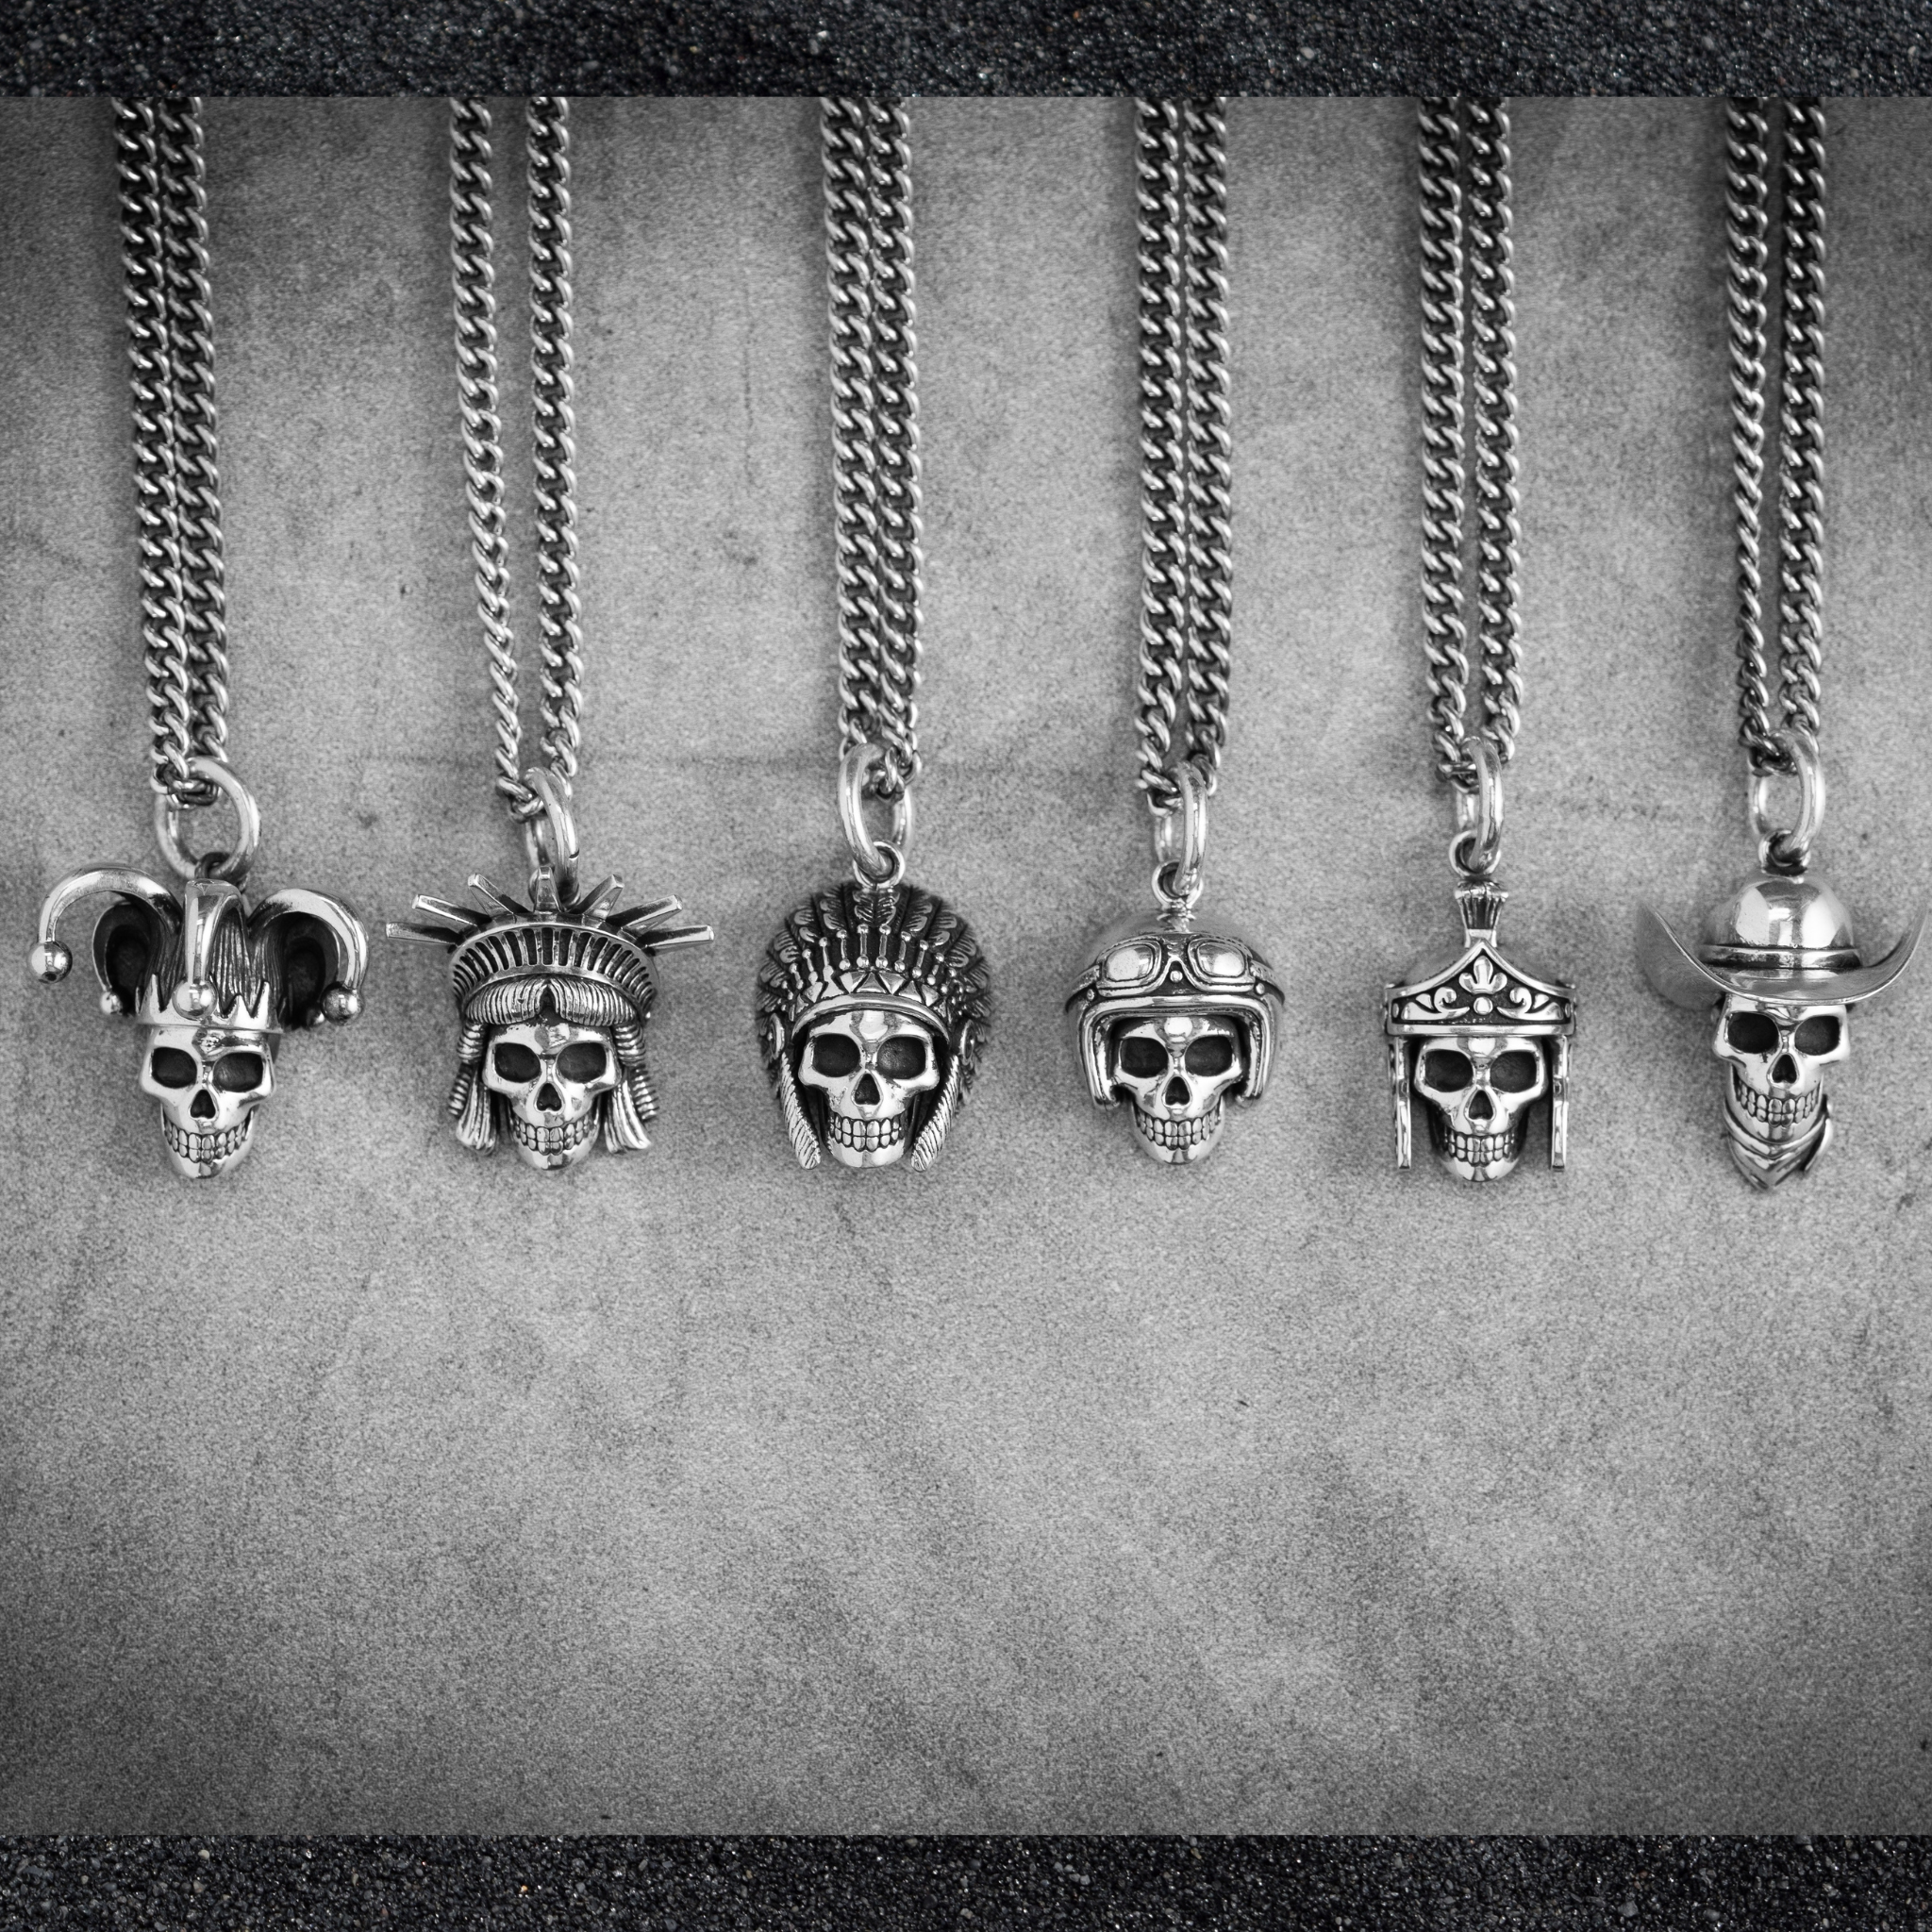 Skull Icons Pendants in a Row